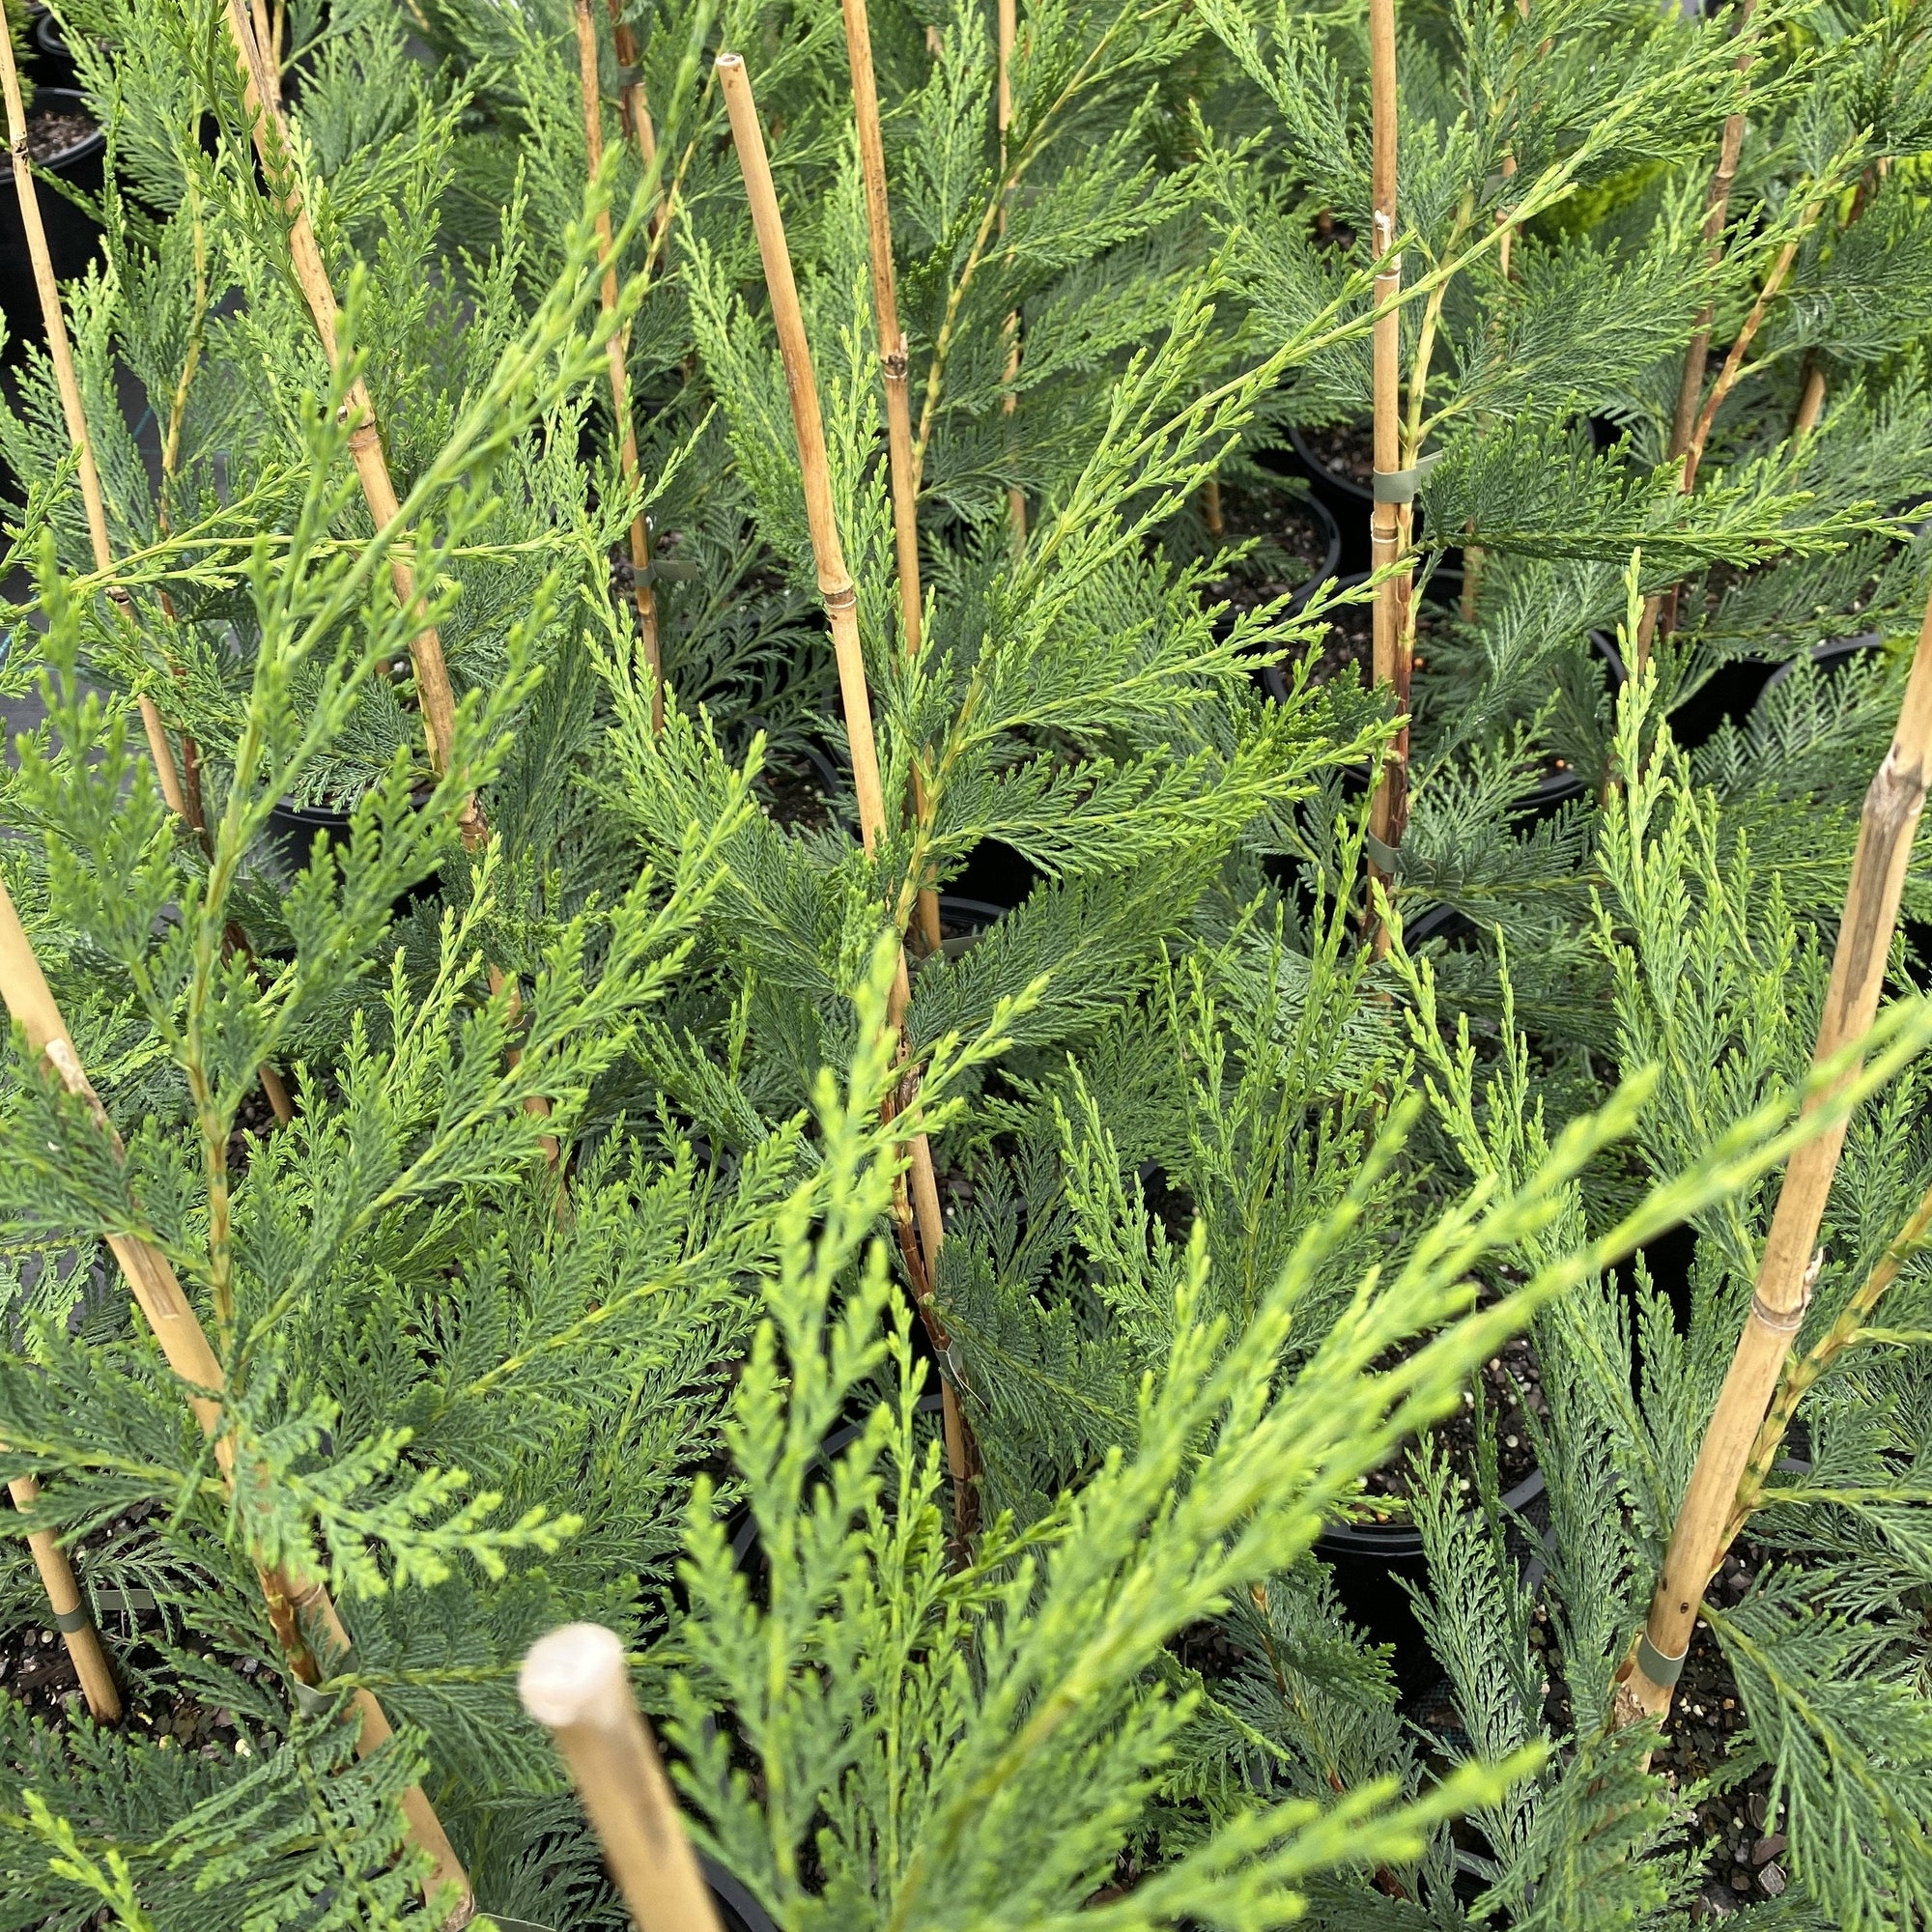 Cupressus 'Leighton Green' is an evergreen fast growing, drought and frost tolerant conifer